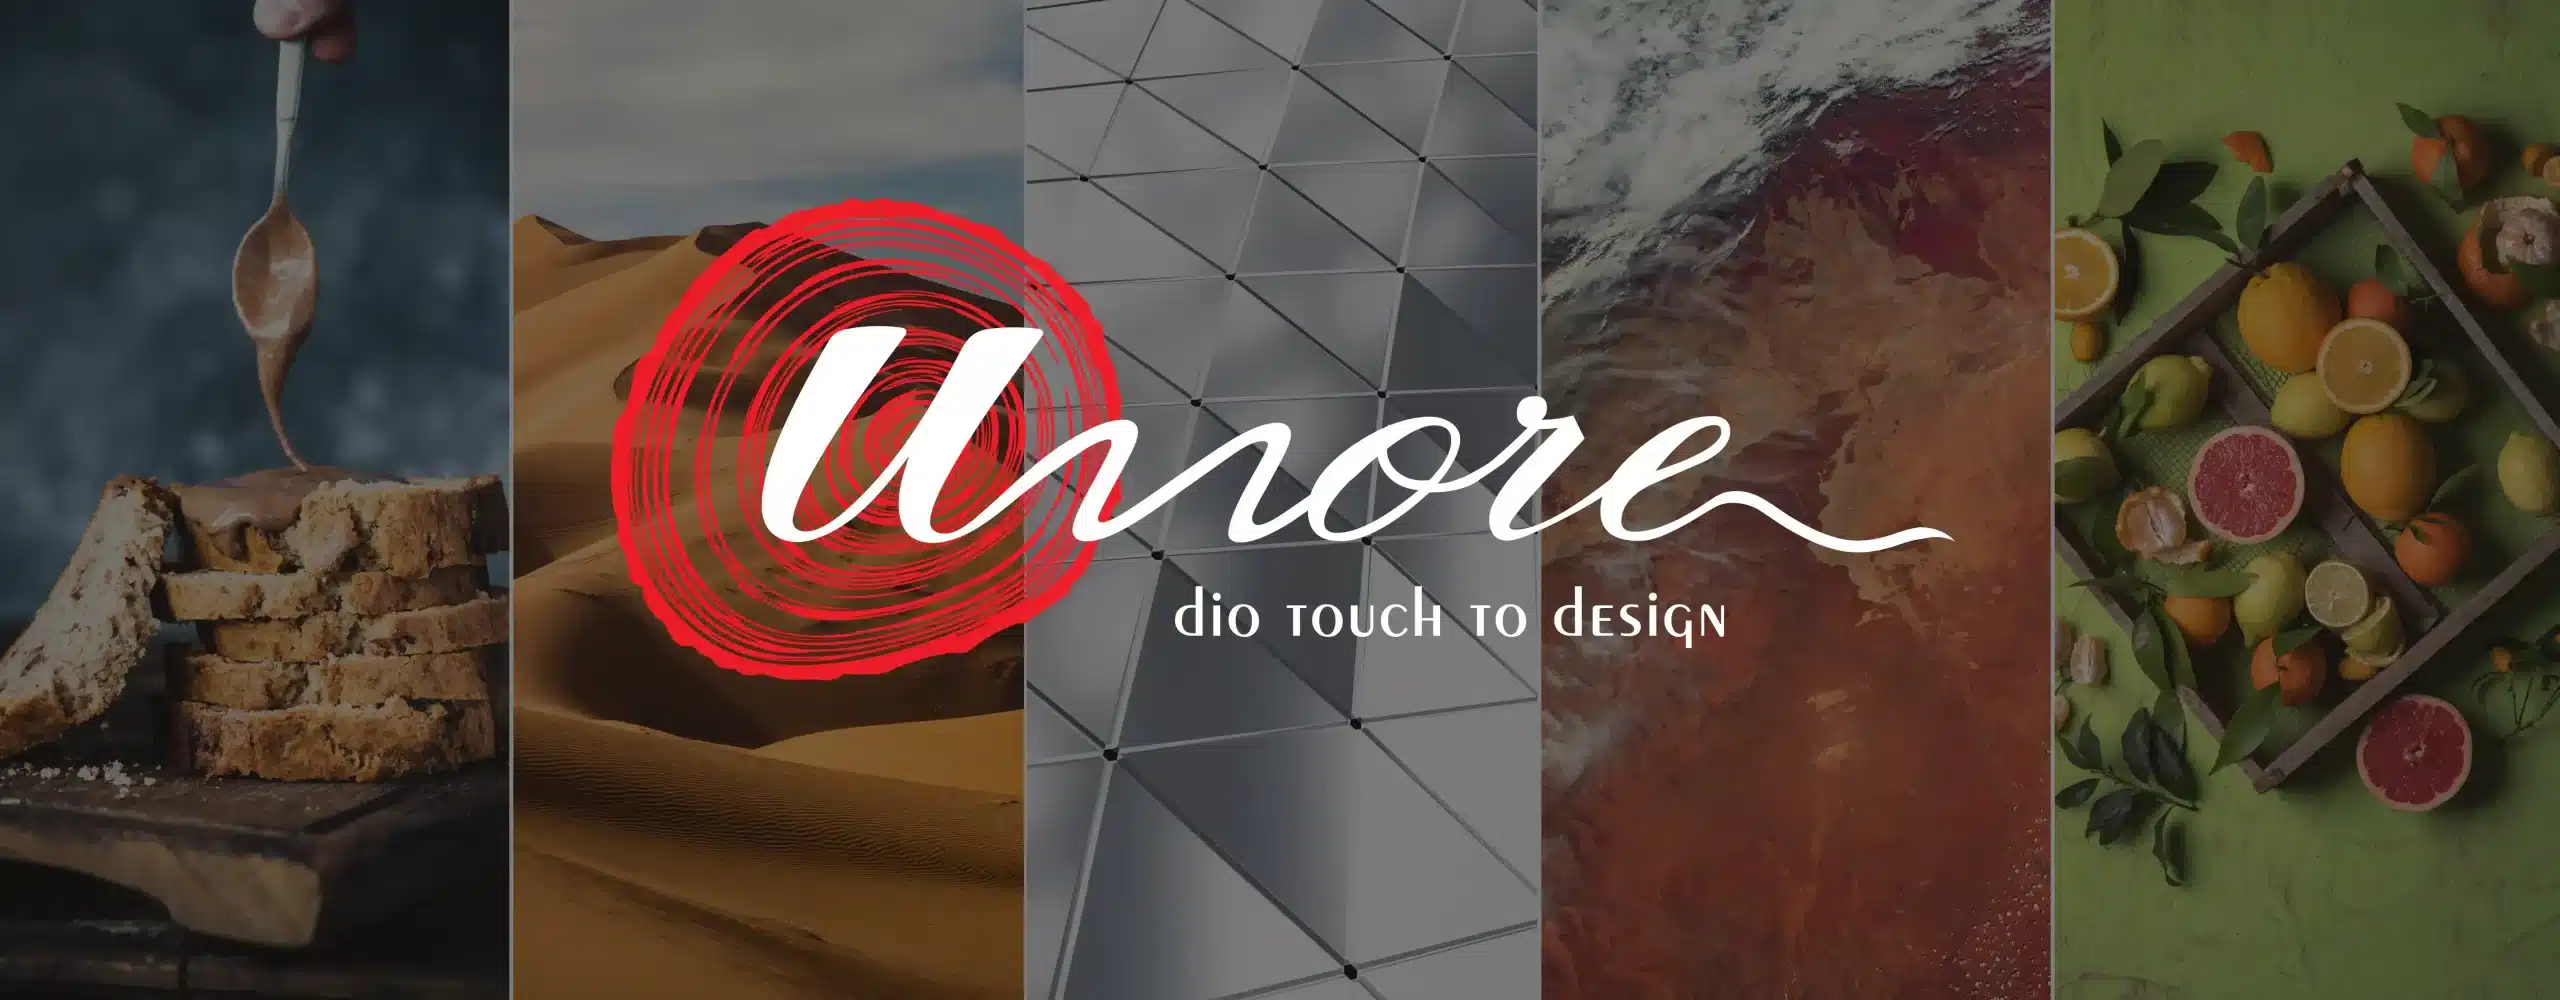 Umore Main Page Banner